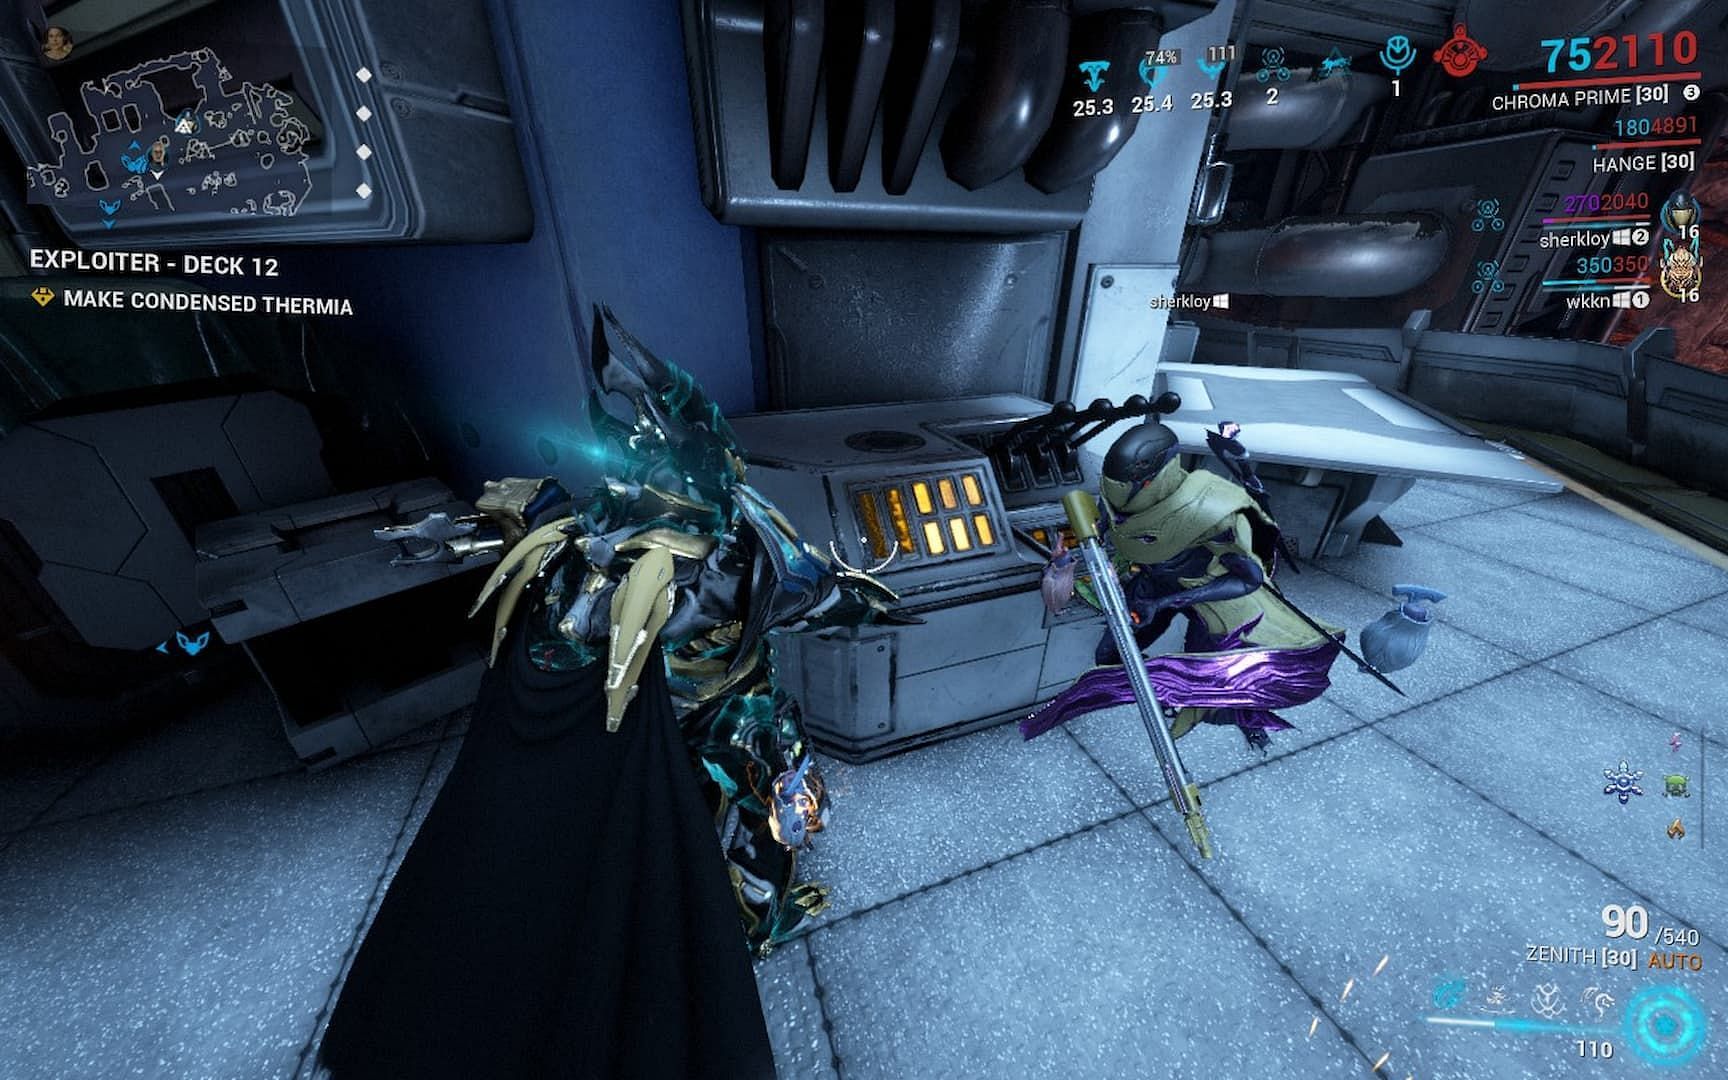 Interact with the console to consume a Diluted Thermia unit and initiate the sequence (Image via Digital Extremes)